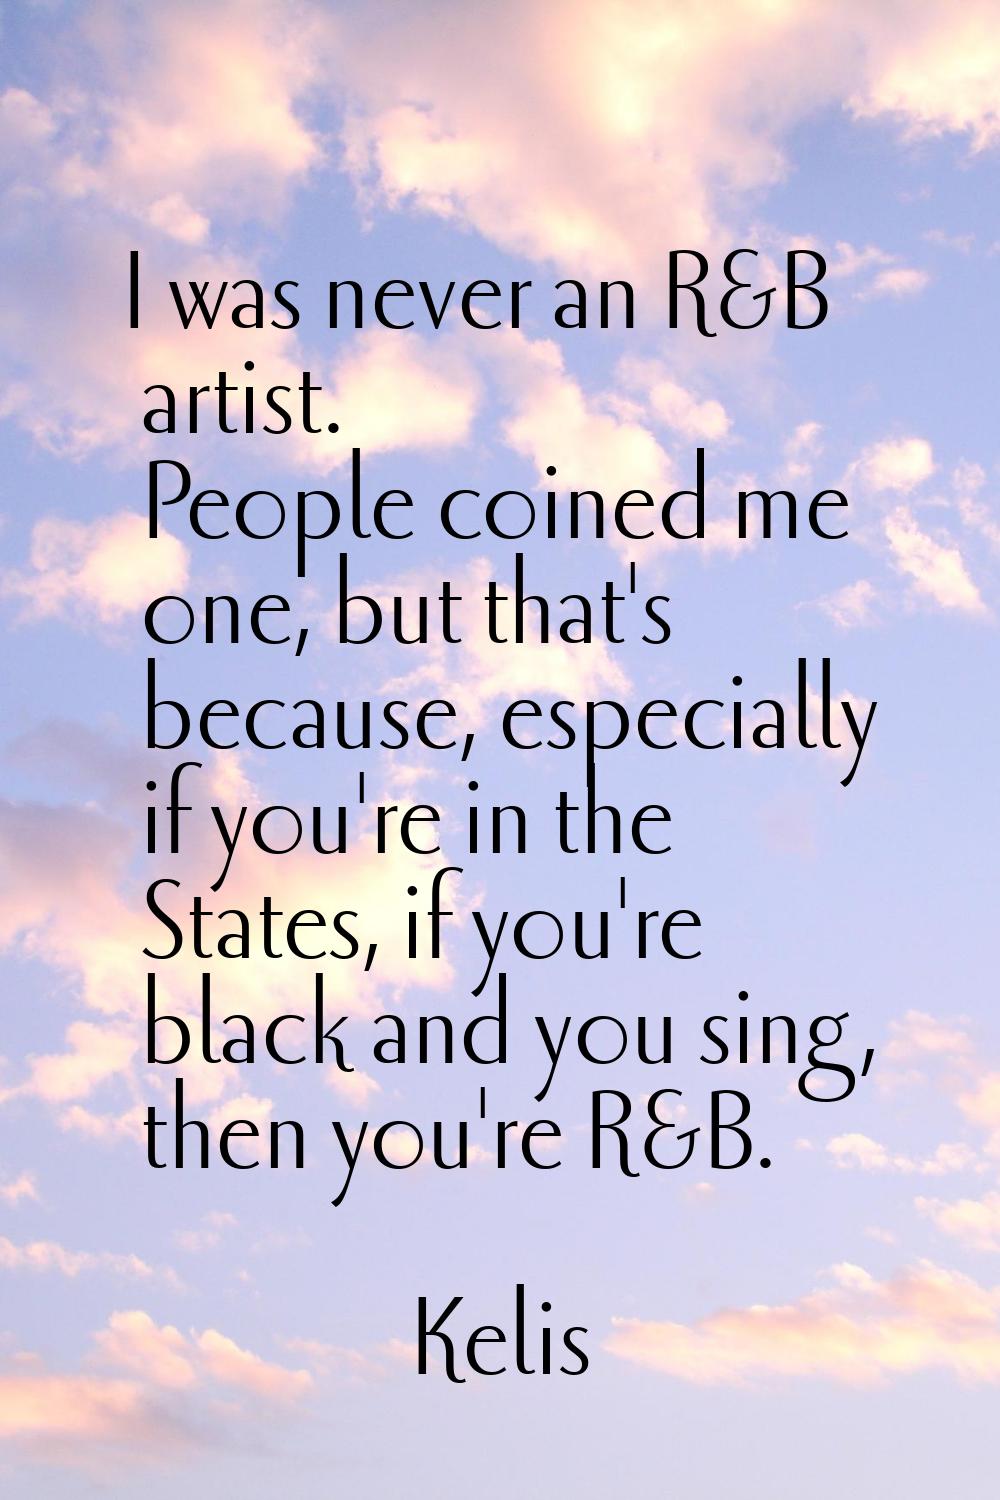 I was never an R&B artist. People coined me one, but that's because, especially if you're in the St